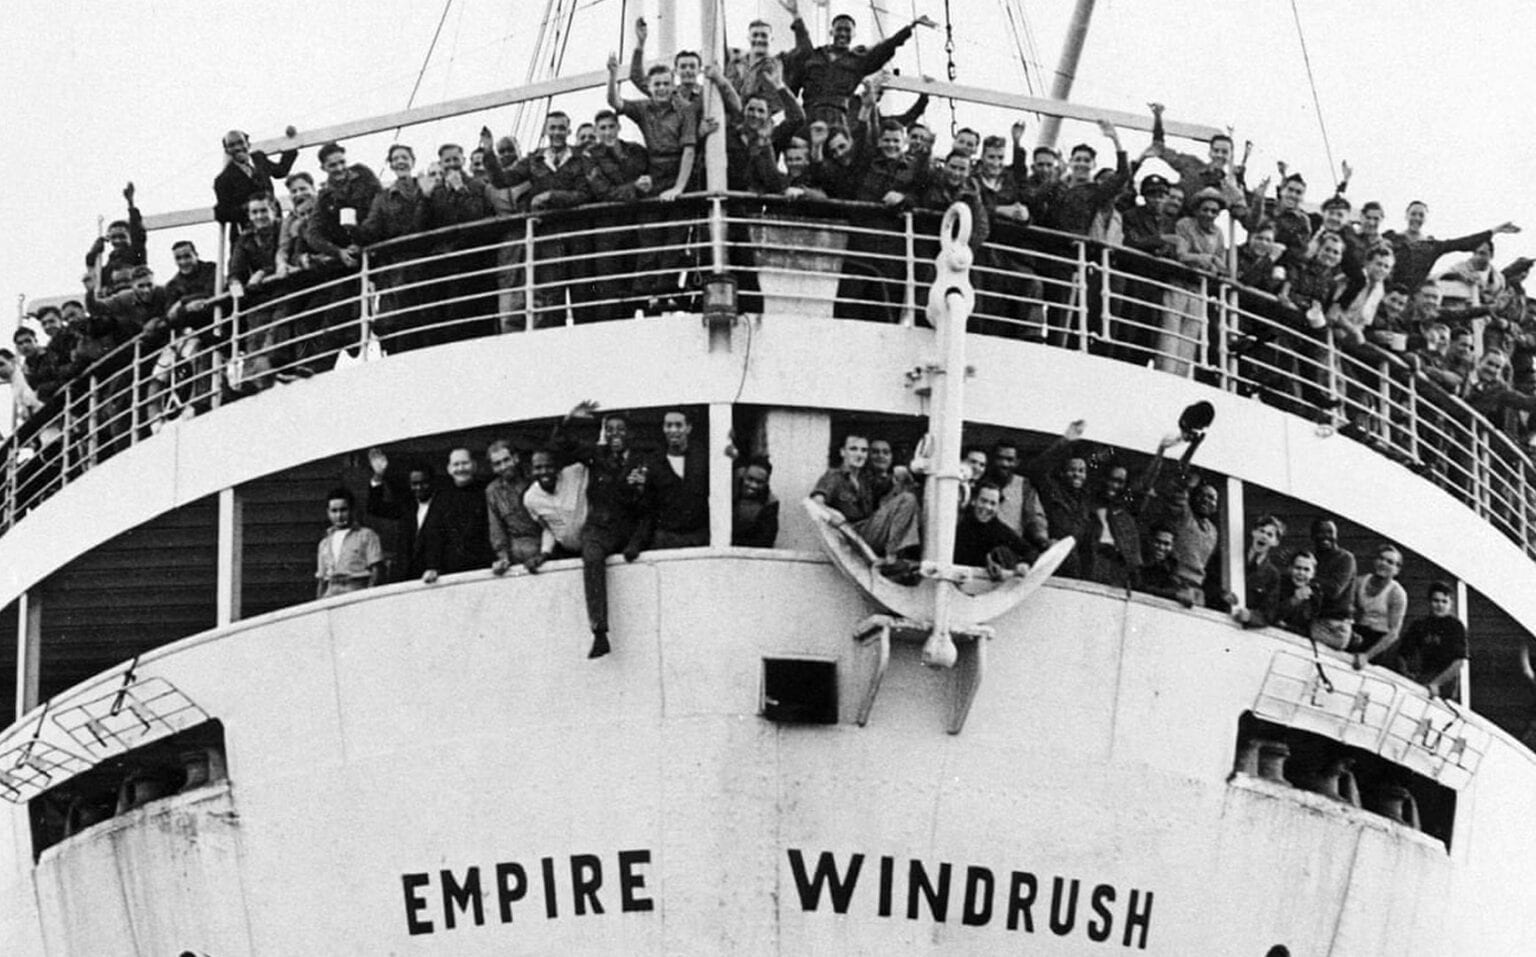 Desperately seeking a writer for Windrush book